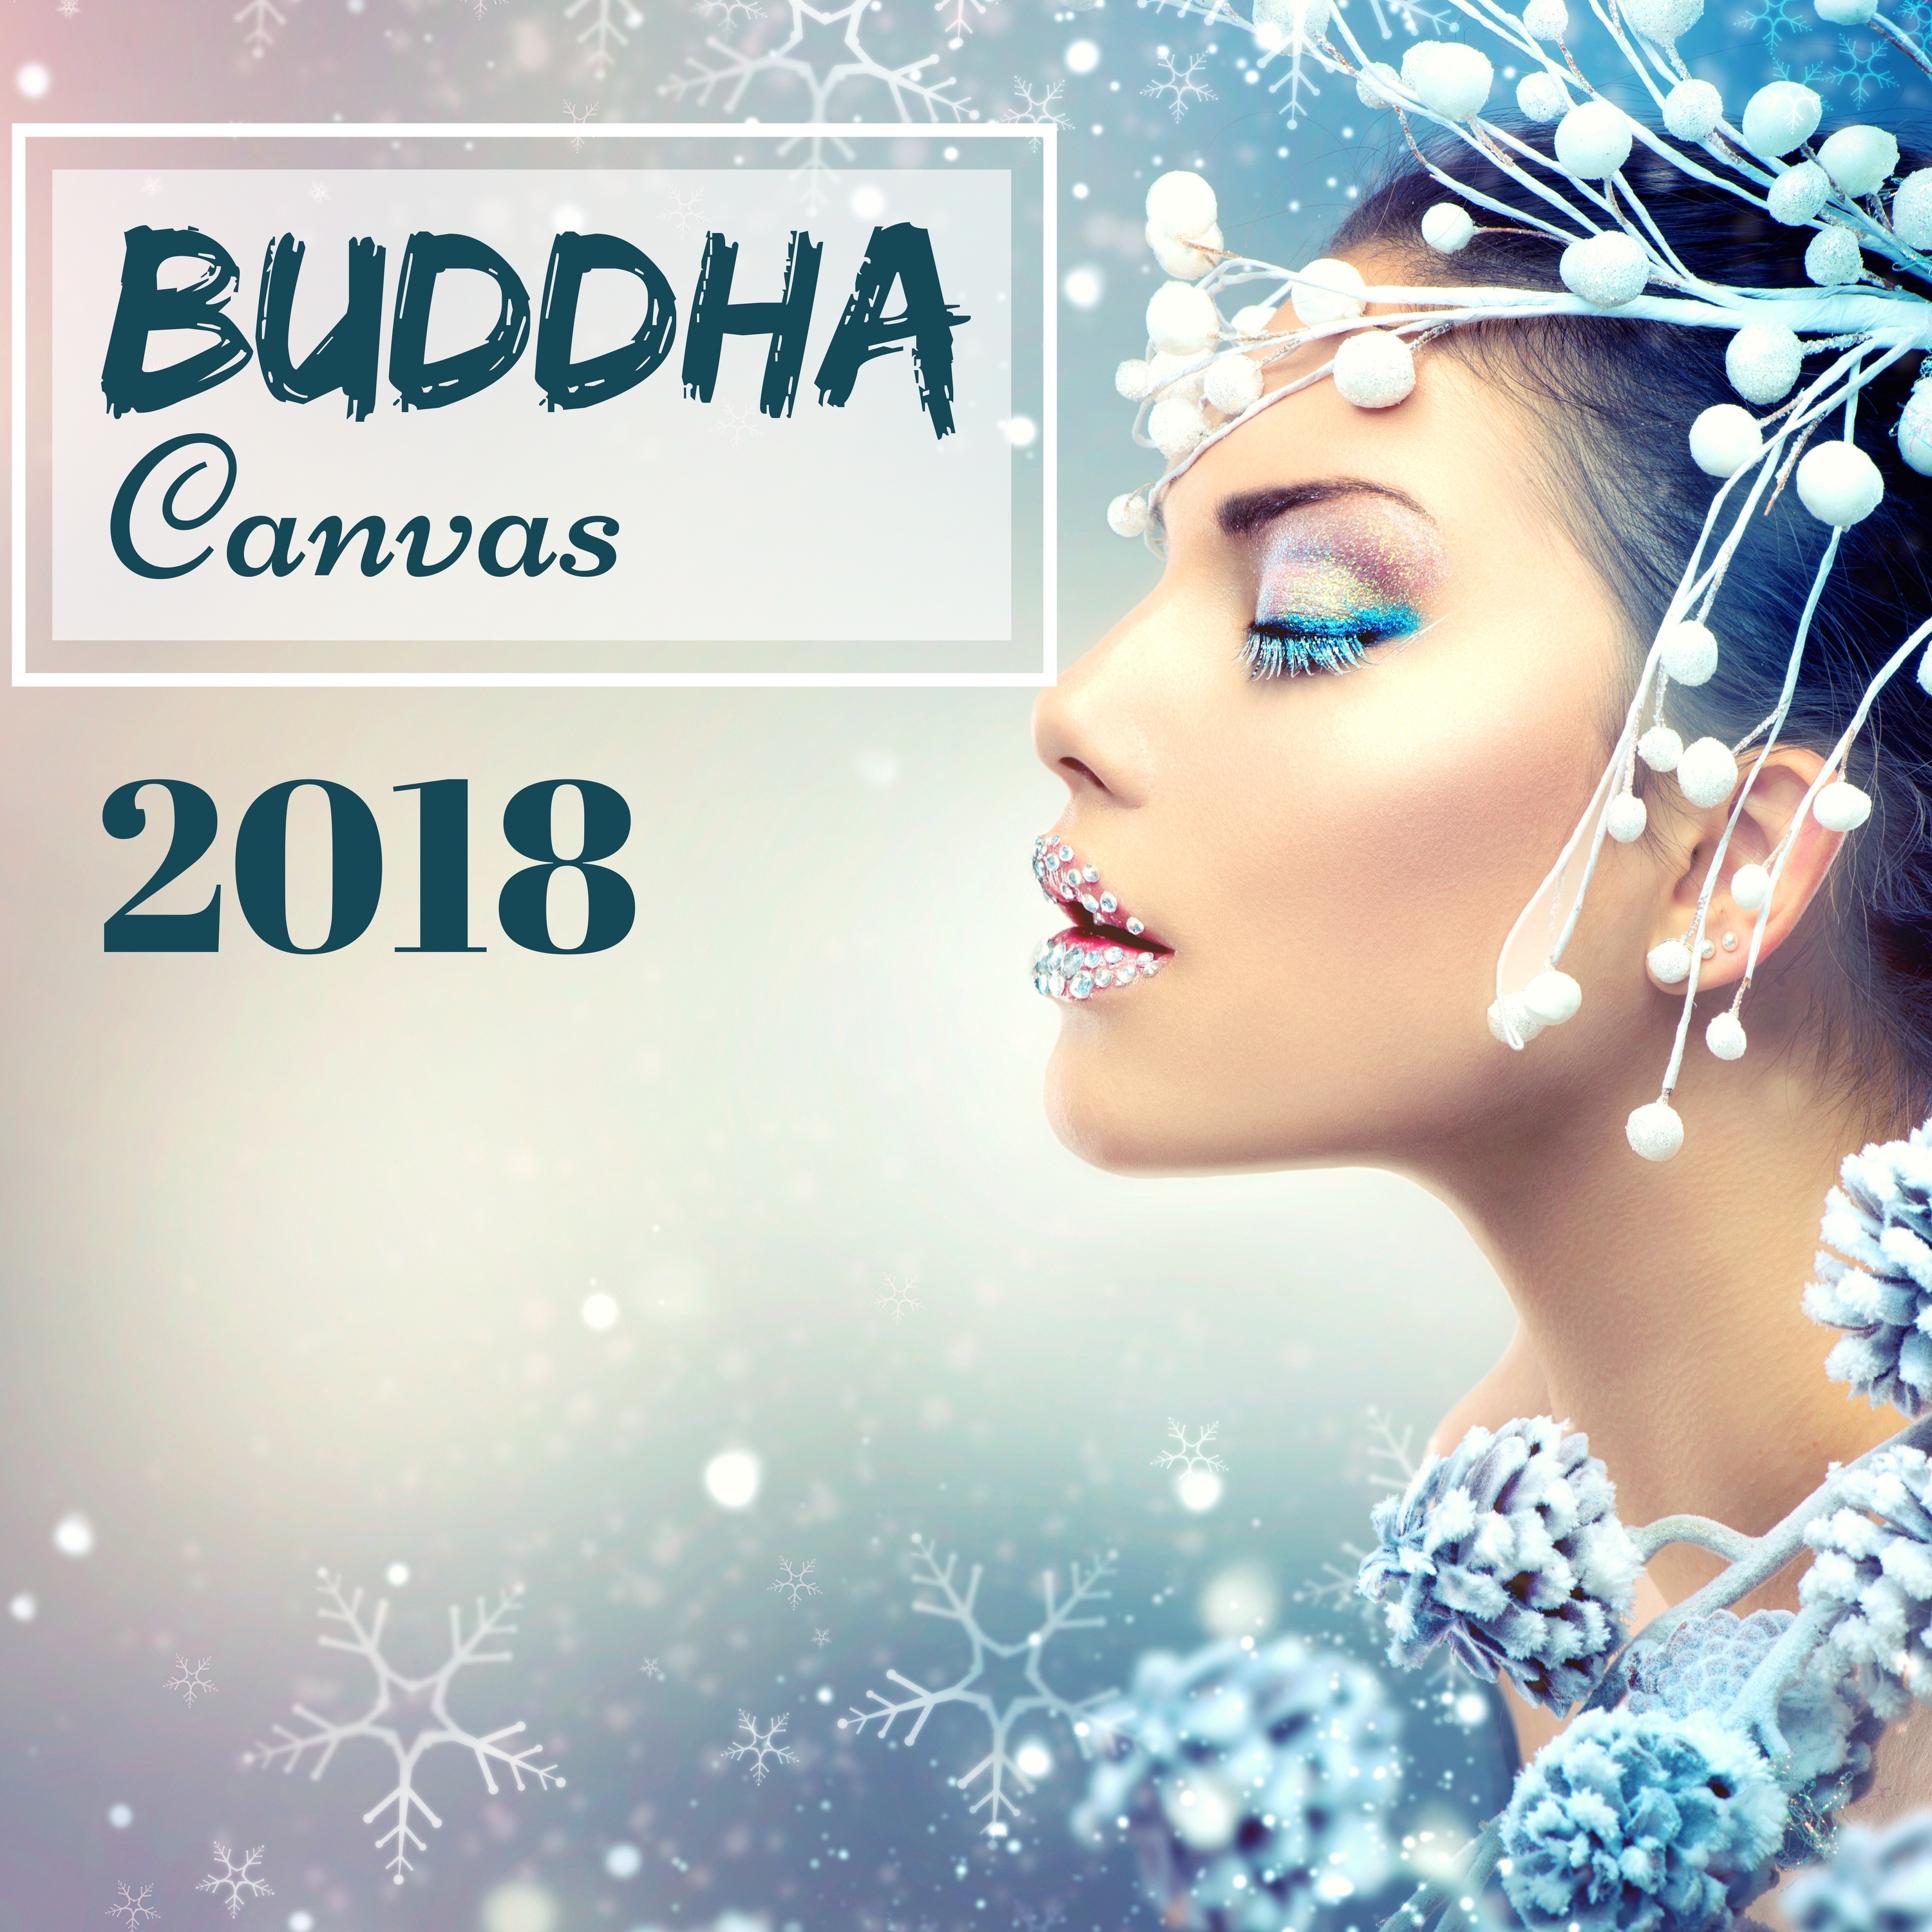 Buddha Canvas 2018 - Luxury Lounge Music CD for Chillout Cafe and Lounge Bar